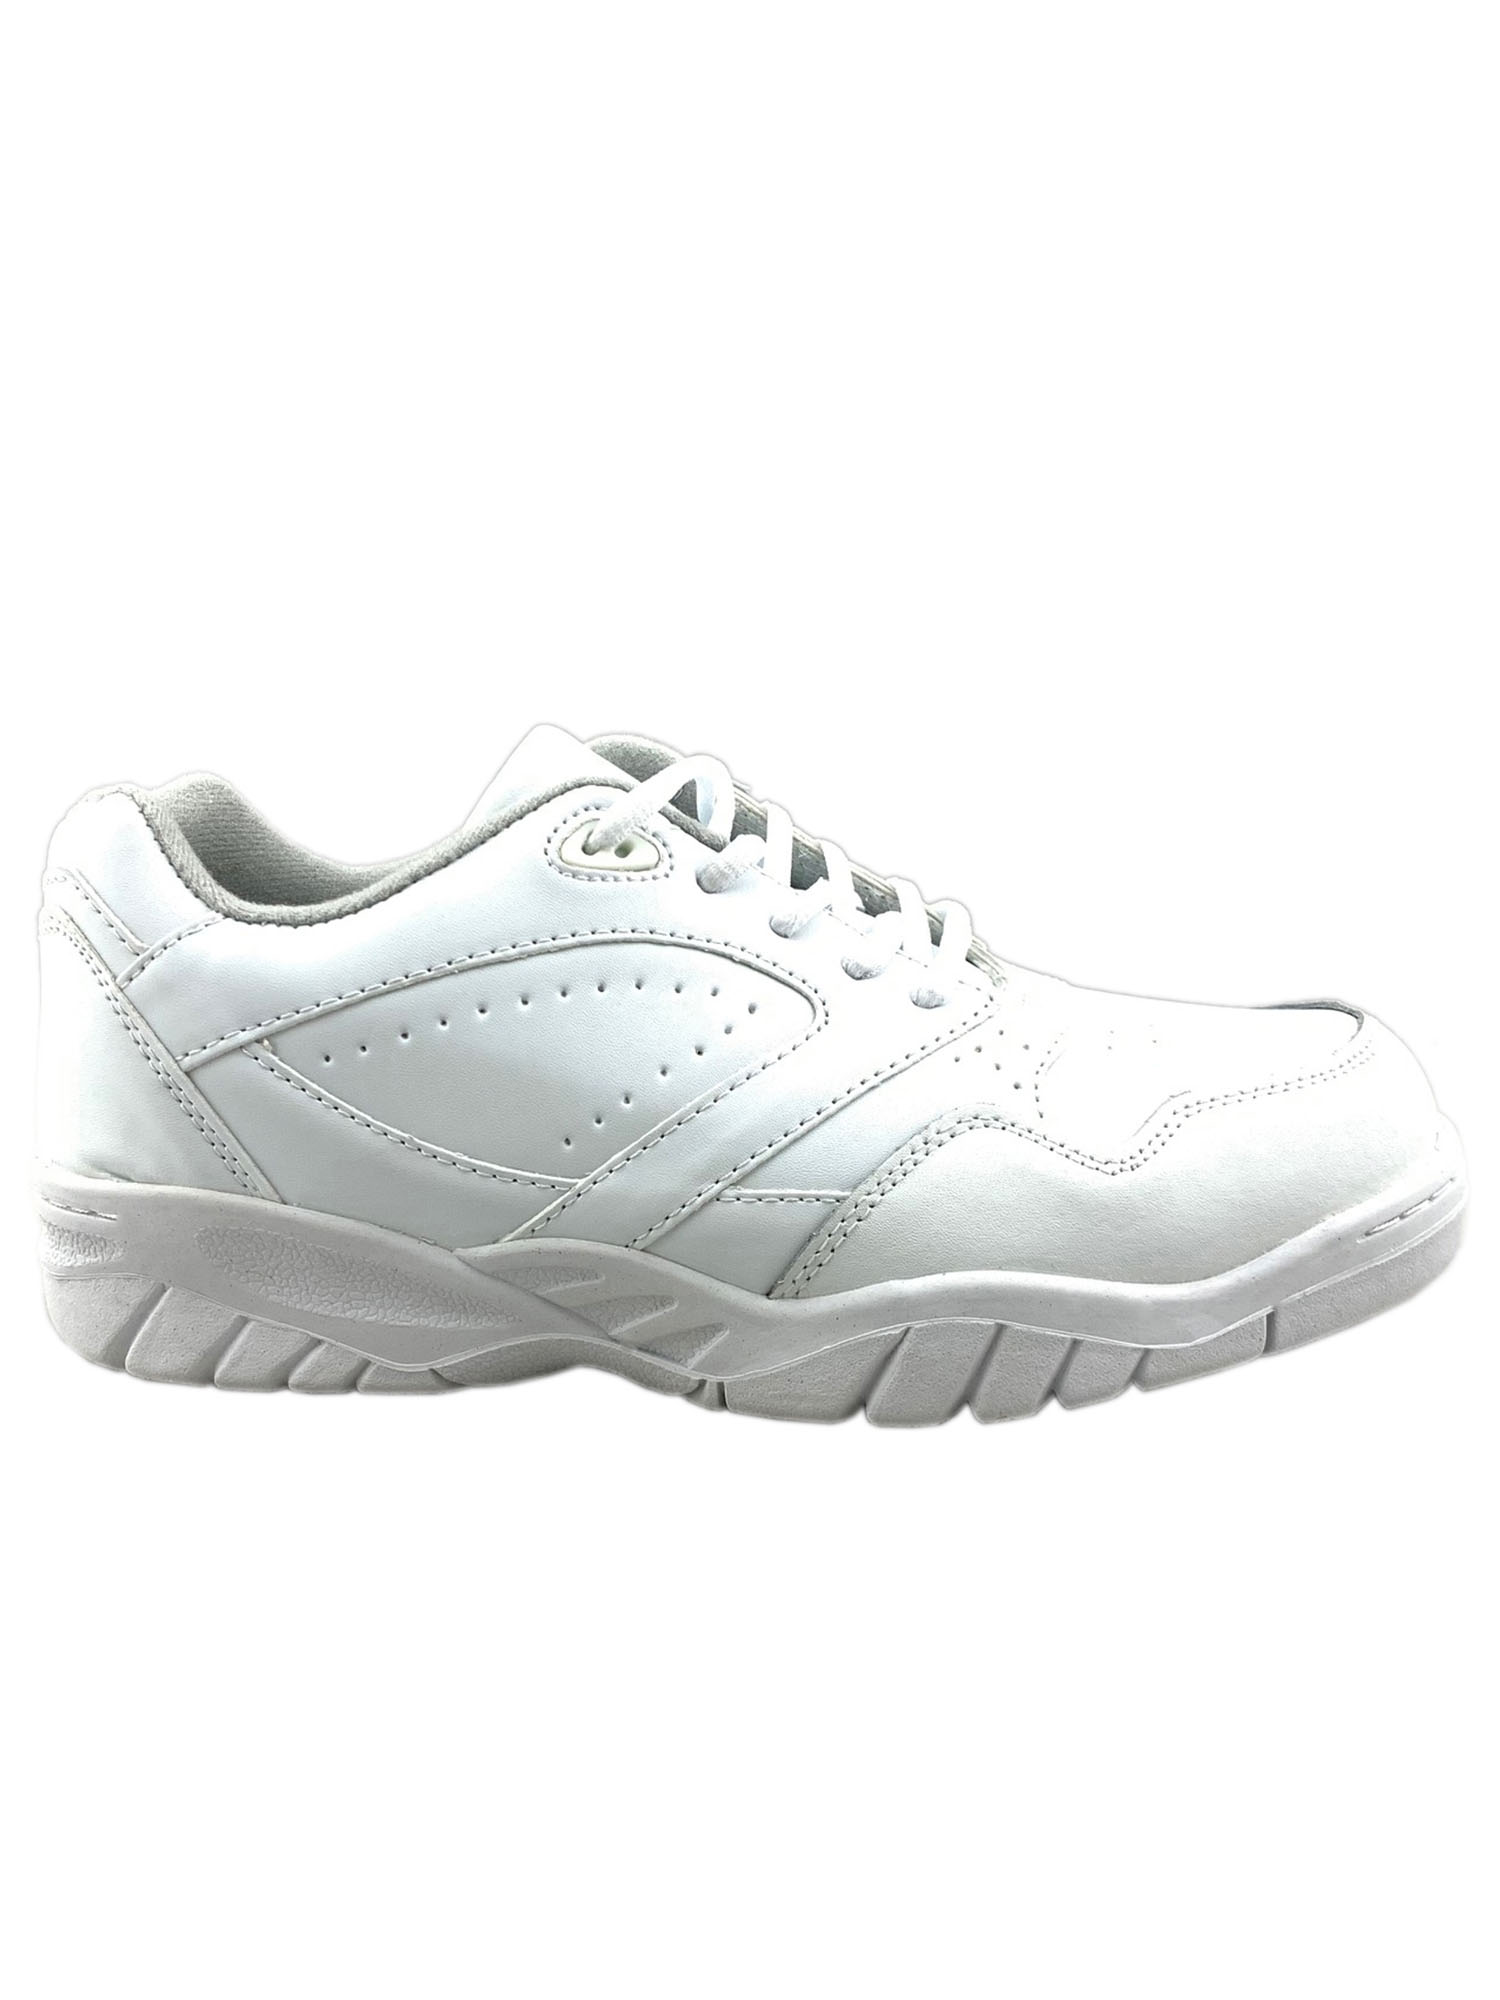 Tanleewa Men's Leather White Sports Shoes Lightweight Sneakers Breathable Casual Shoe Size 3.5 - image 1 of 5